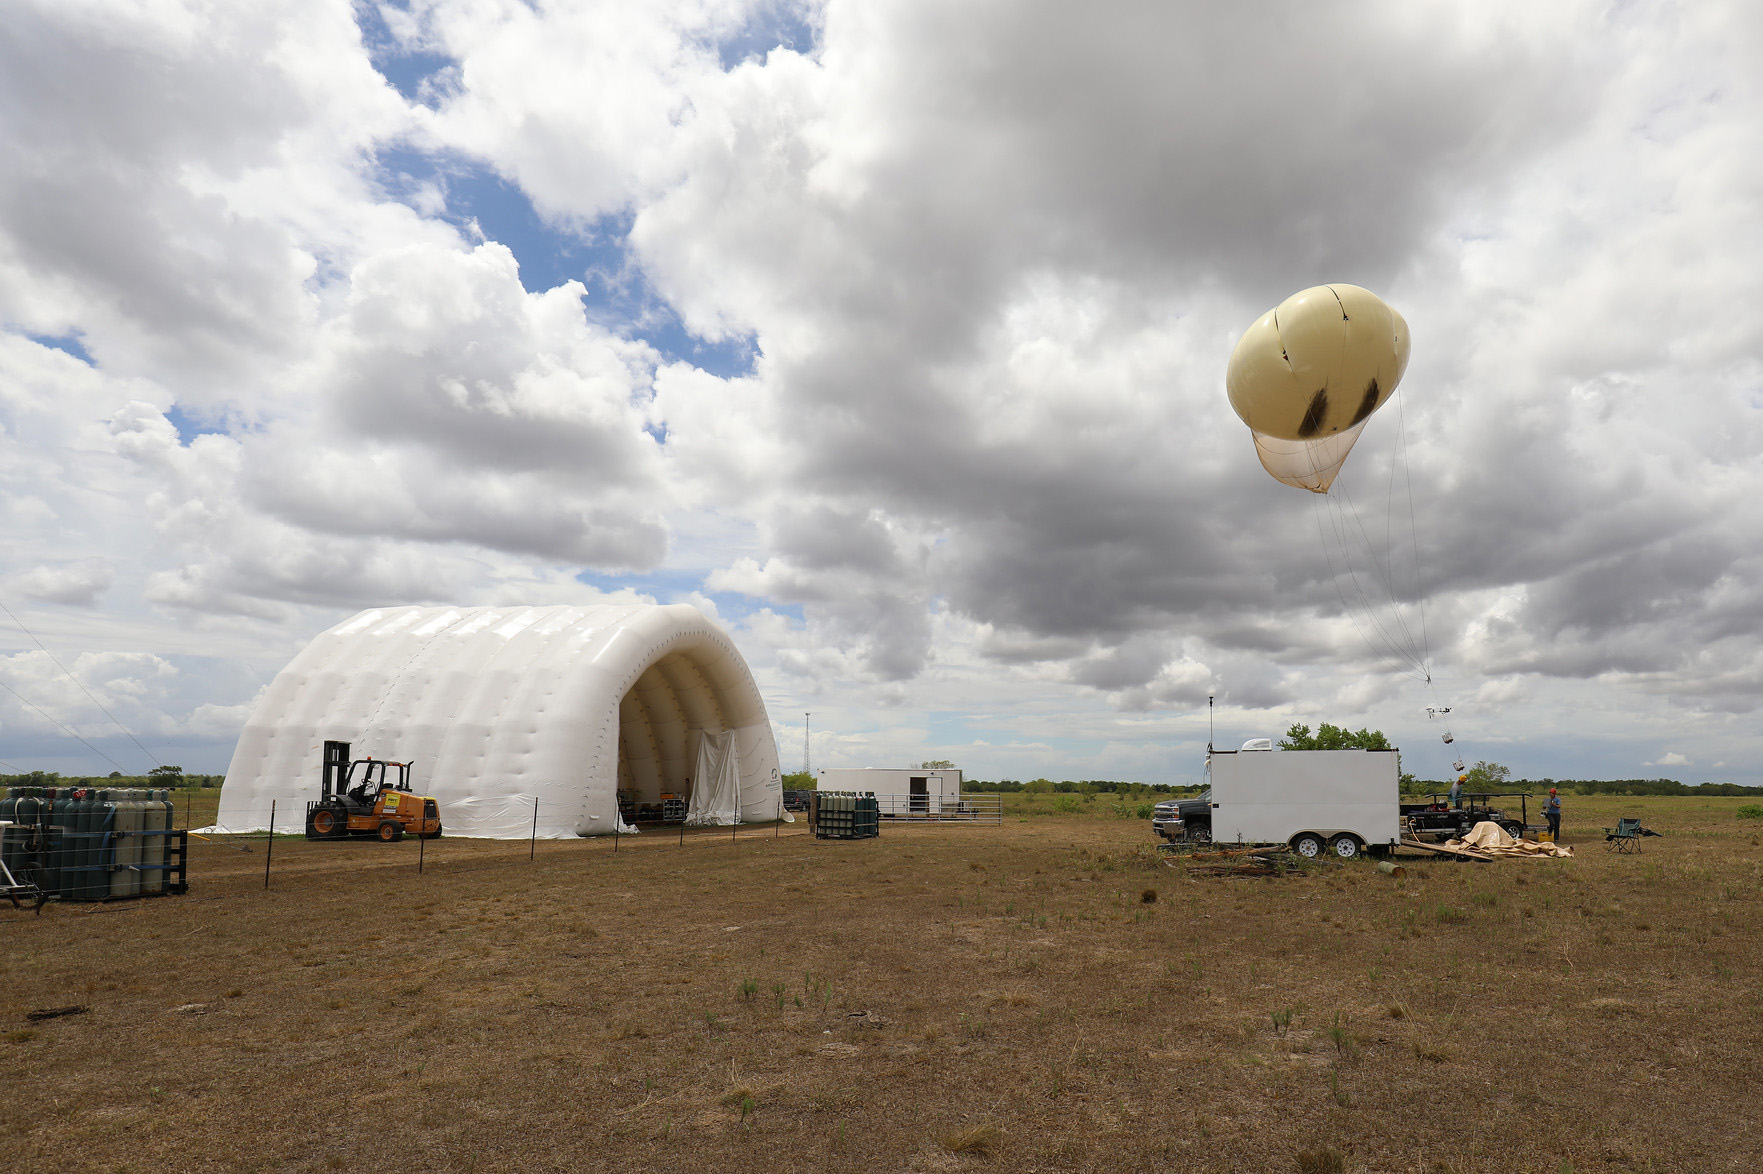 This ARM tethered balloon system (TBS) flight occurred August 6, 2022, in Guy, Texas, as part of the TRacking Aerosol Convection interactions ExpeRiment (TRACER). As part of ARM’s latest proposal call with the Environmental Molecular Sciences Laboratory (EMSL), scientists can propose to analyze samples from past TBS flights, including those during TRACER. Photo is by Guy Tubbs. 